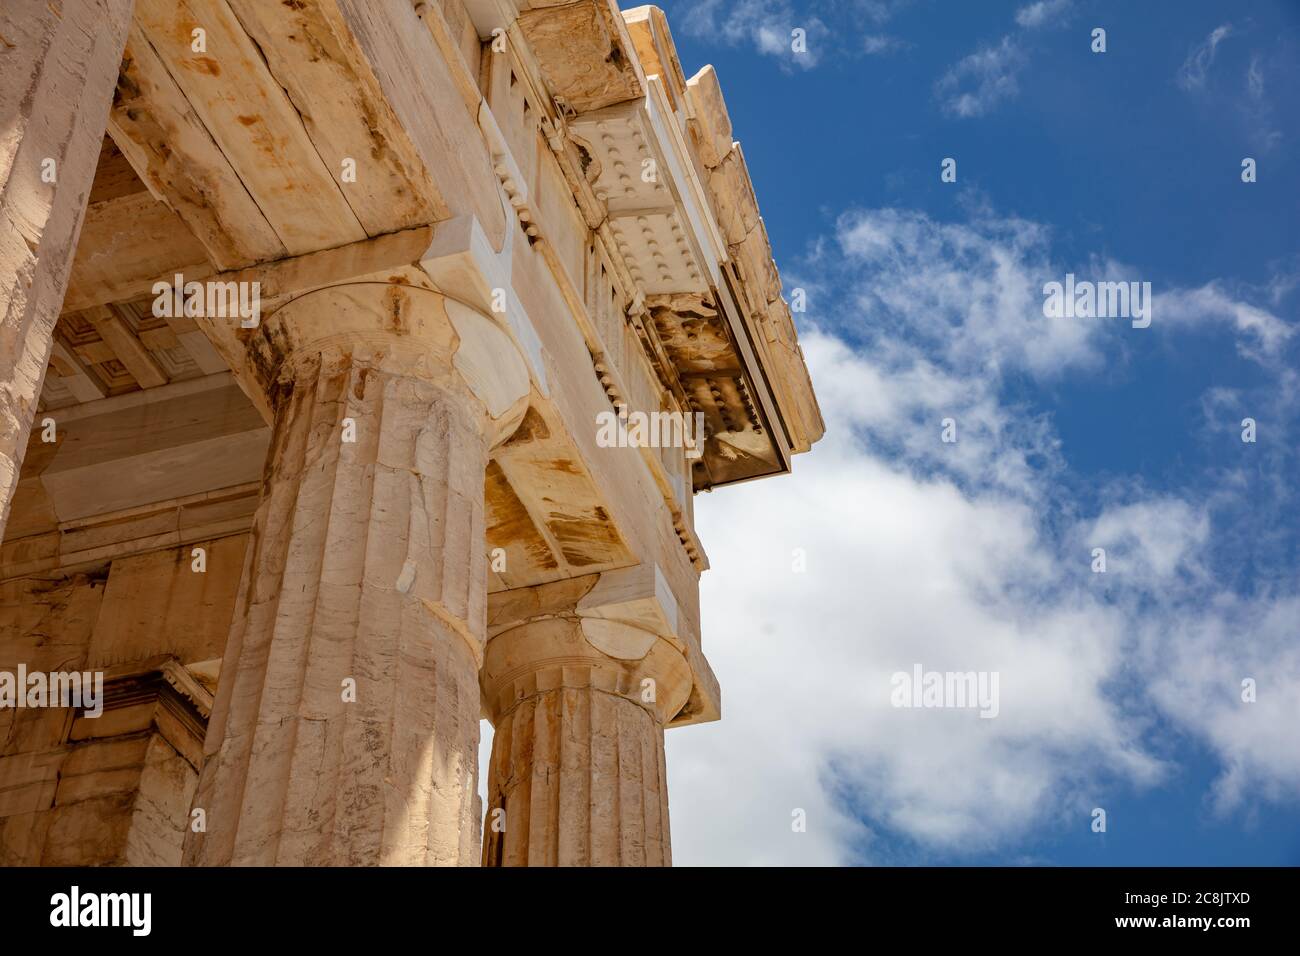 Athens Acropolis, Greece landmark. Ancient Greek Propylaea entrance gate part of ceiling and pillars low angle view, blue sky, spring sunny day. Stock Photo